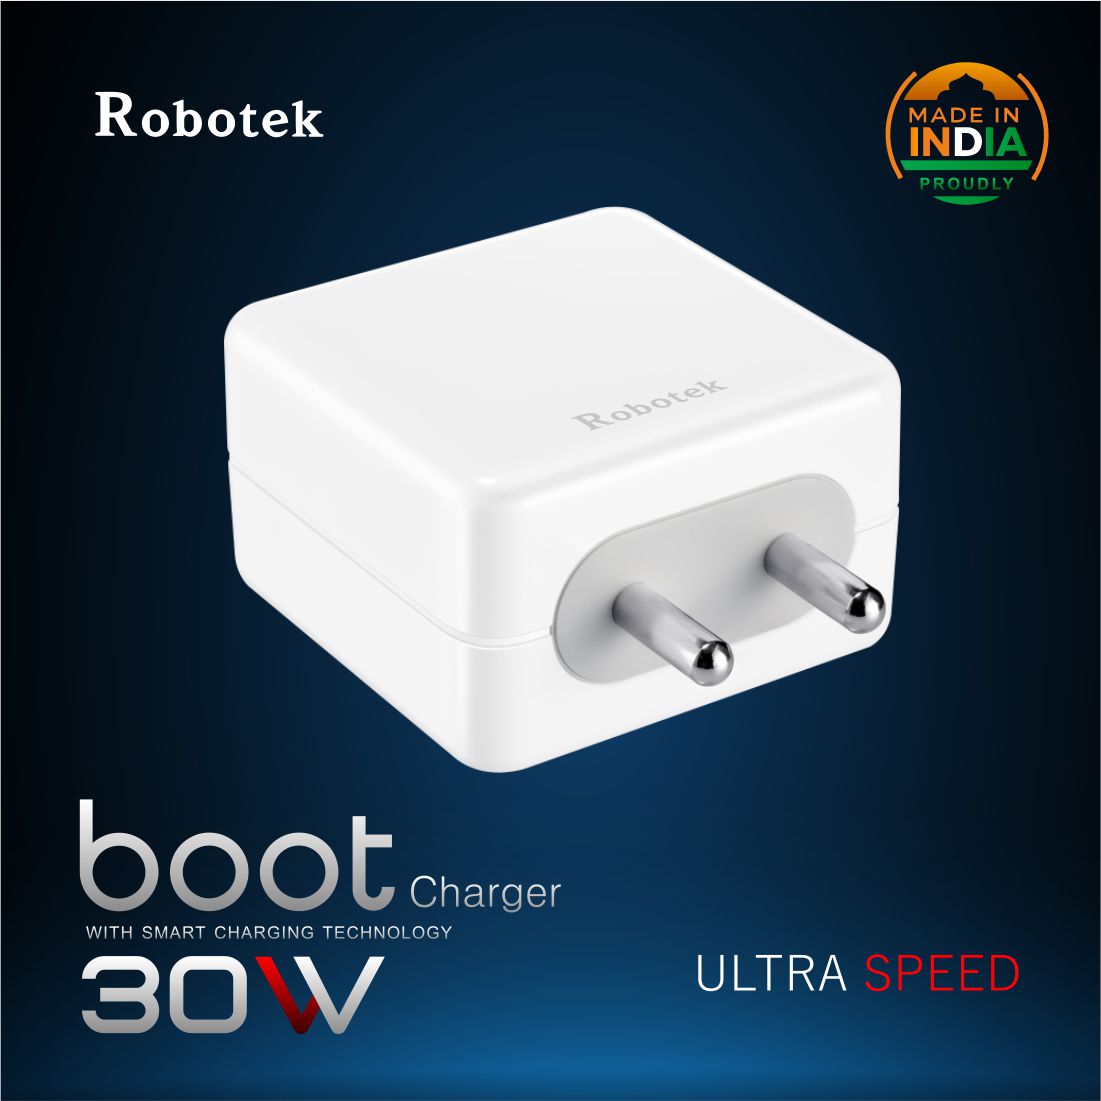 Boot 30W Fast Charging Wall Charger Adapter for Type C/Micro USB/iPhone | WARP Charger | VOOC Charger | QC 3.0 | DASH Charger | IC Protection (Adapter + Type C Cable)